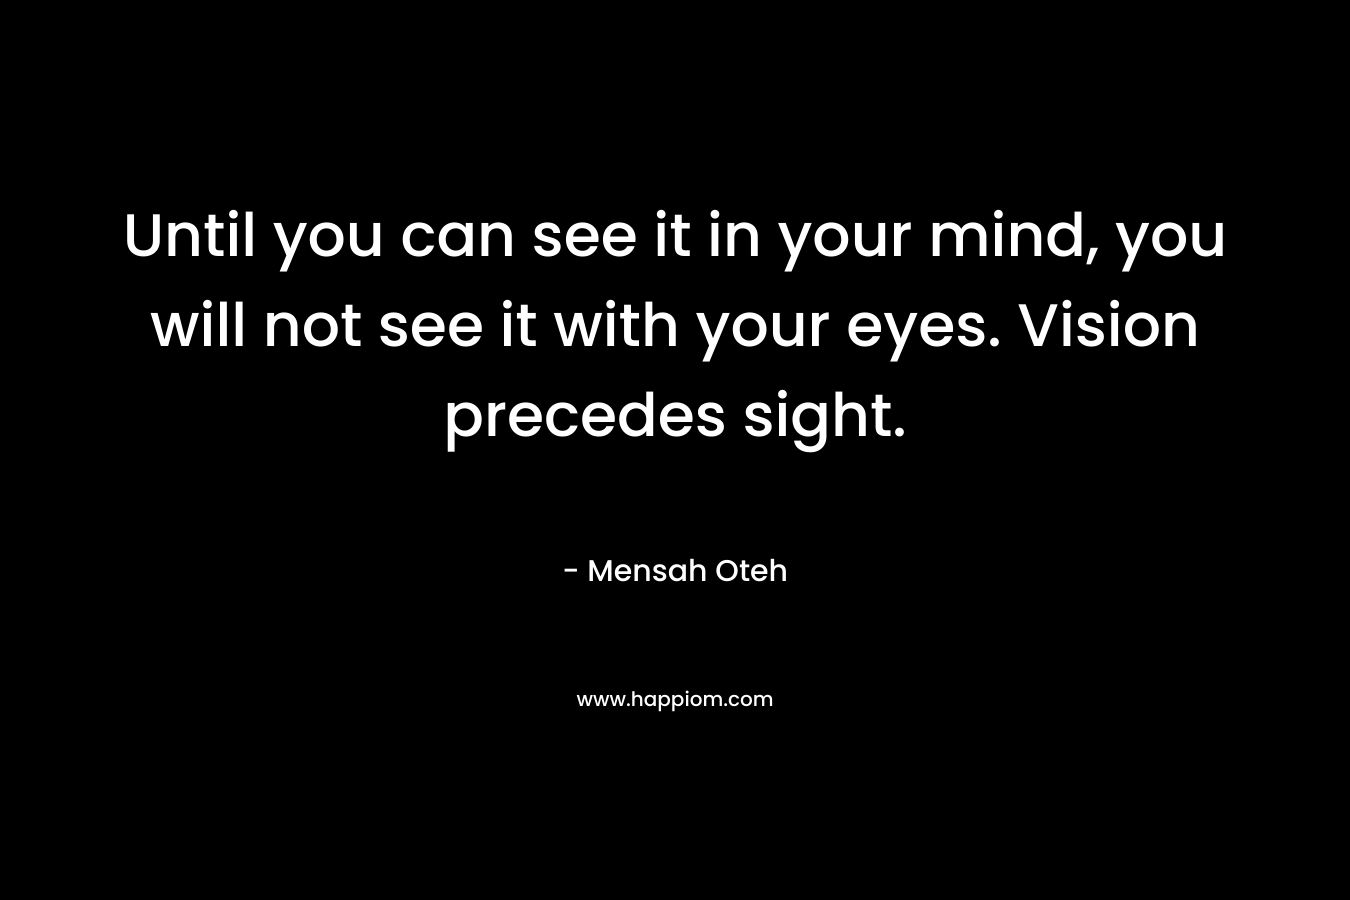 Until you can see it in your mind, you will not see it with your eyes. Vision precedes sight.